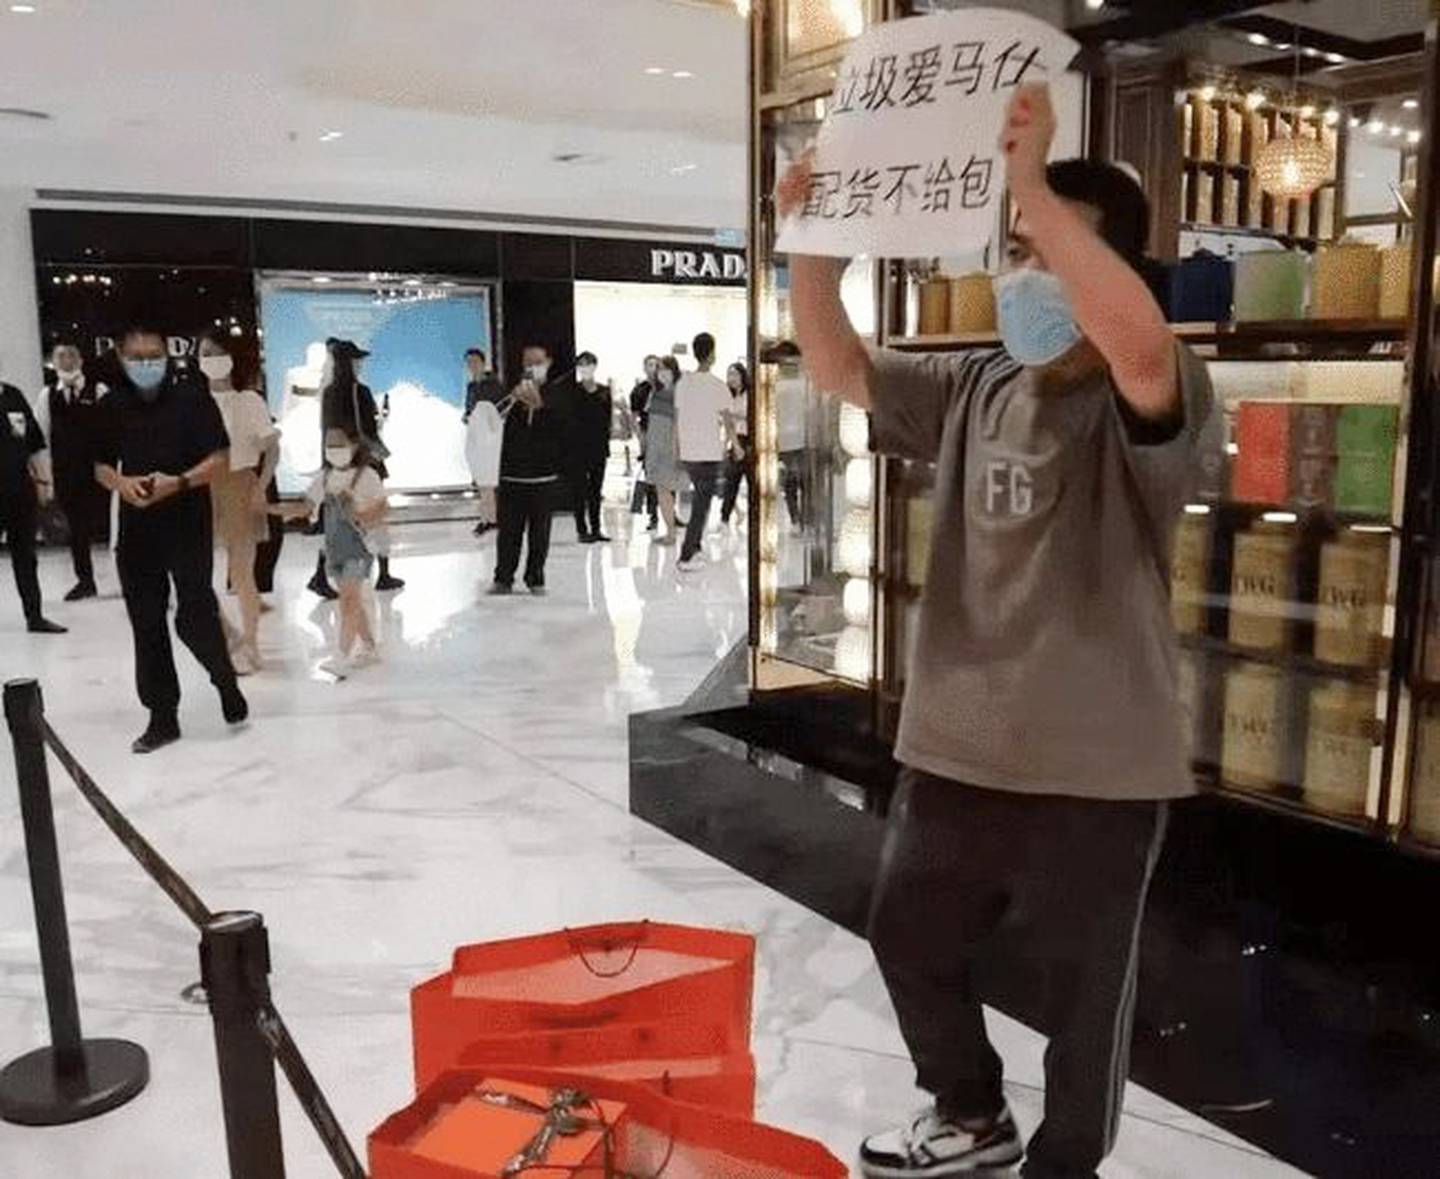 A lone protestor holds a sign saying “Rubbish Hermès peihuo but no bag”.